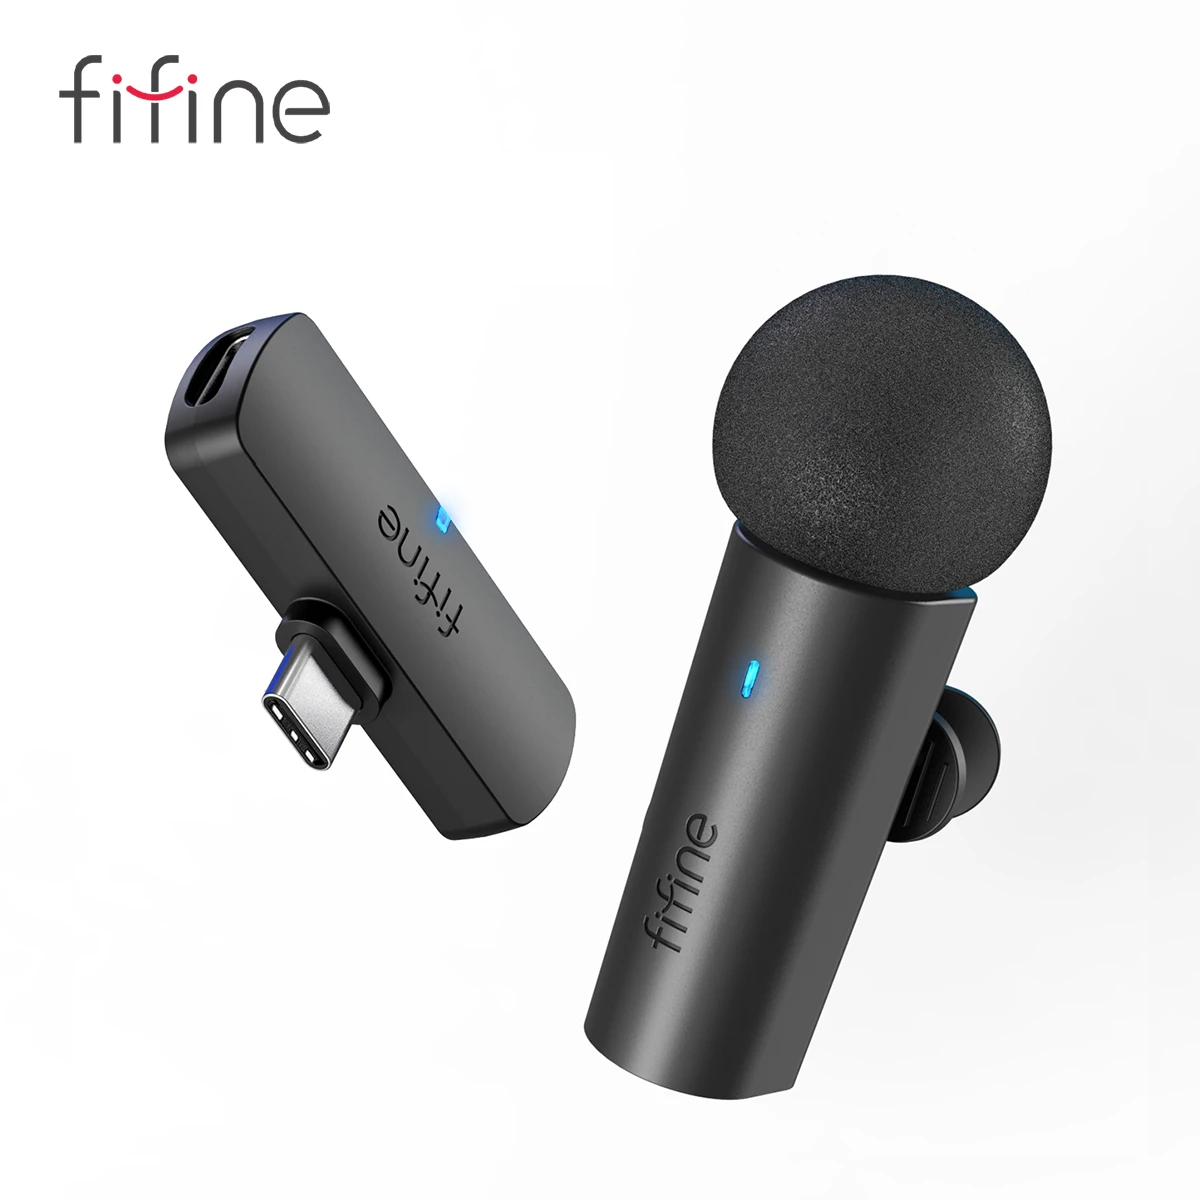 FIFINE Wireless Lavalier Recording Microphone,Type-C Mini MIC for Mobile Phone/Tablet/Laptop,Live Streams/Vlog/Interview-M6